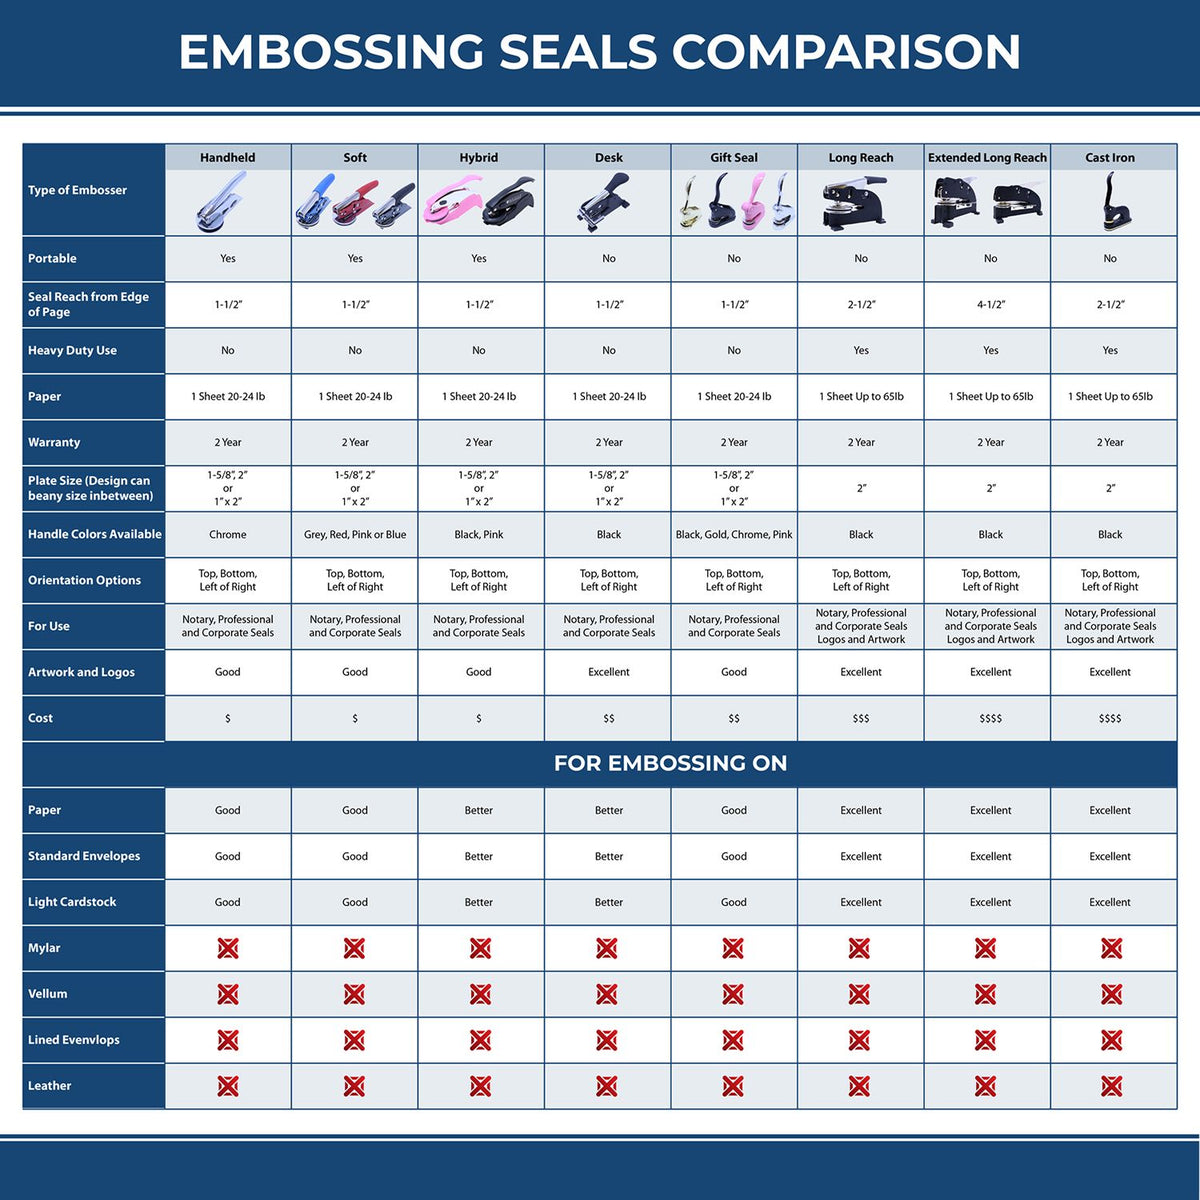 A comparison chart for the different types of mount models available for the Soft Arizona Professional Geologist Seal